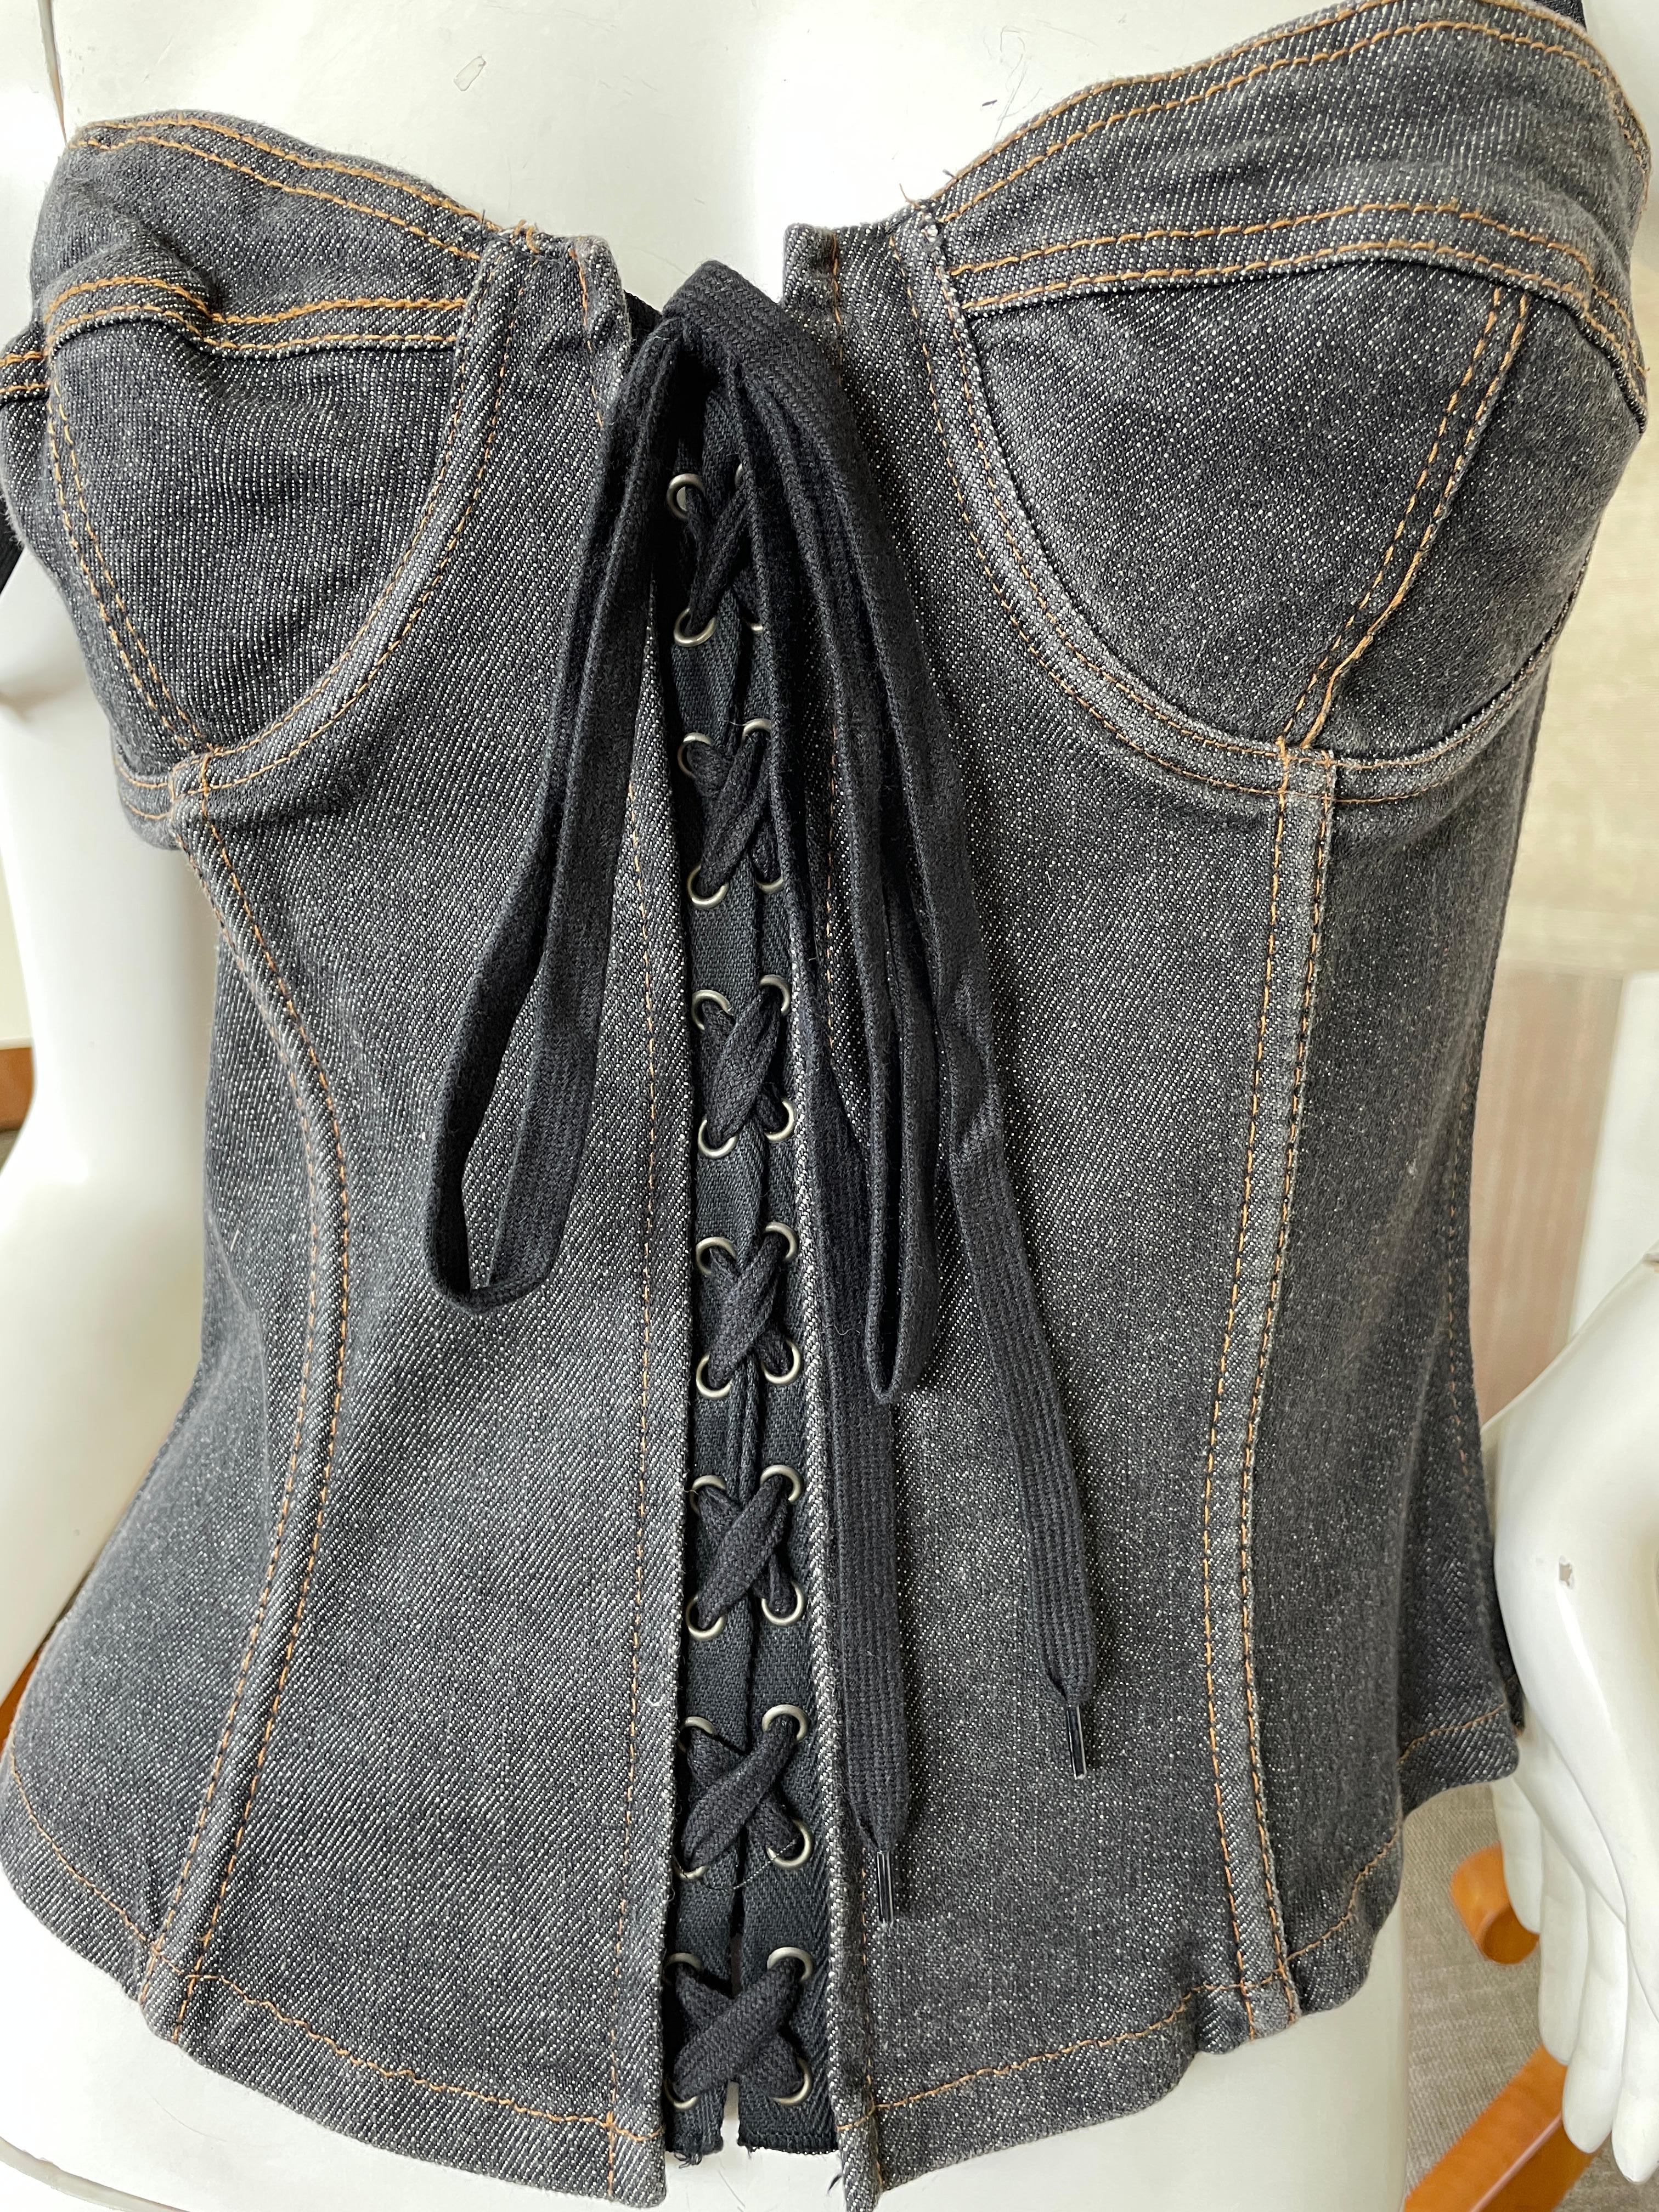 Dolce & Gabbana for D&G Sexy Gray Denim Corset with Lace Up Details.
Zips up the side, the corset lacing up the front and back is ornamental.
Size 40
 Bust 34